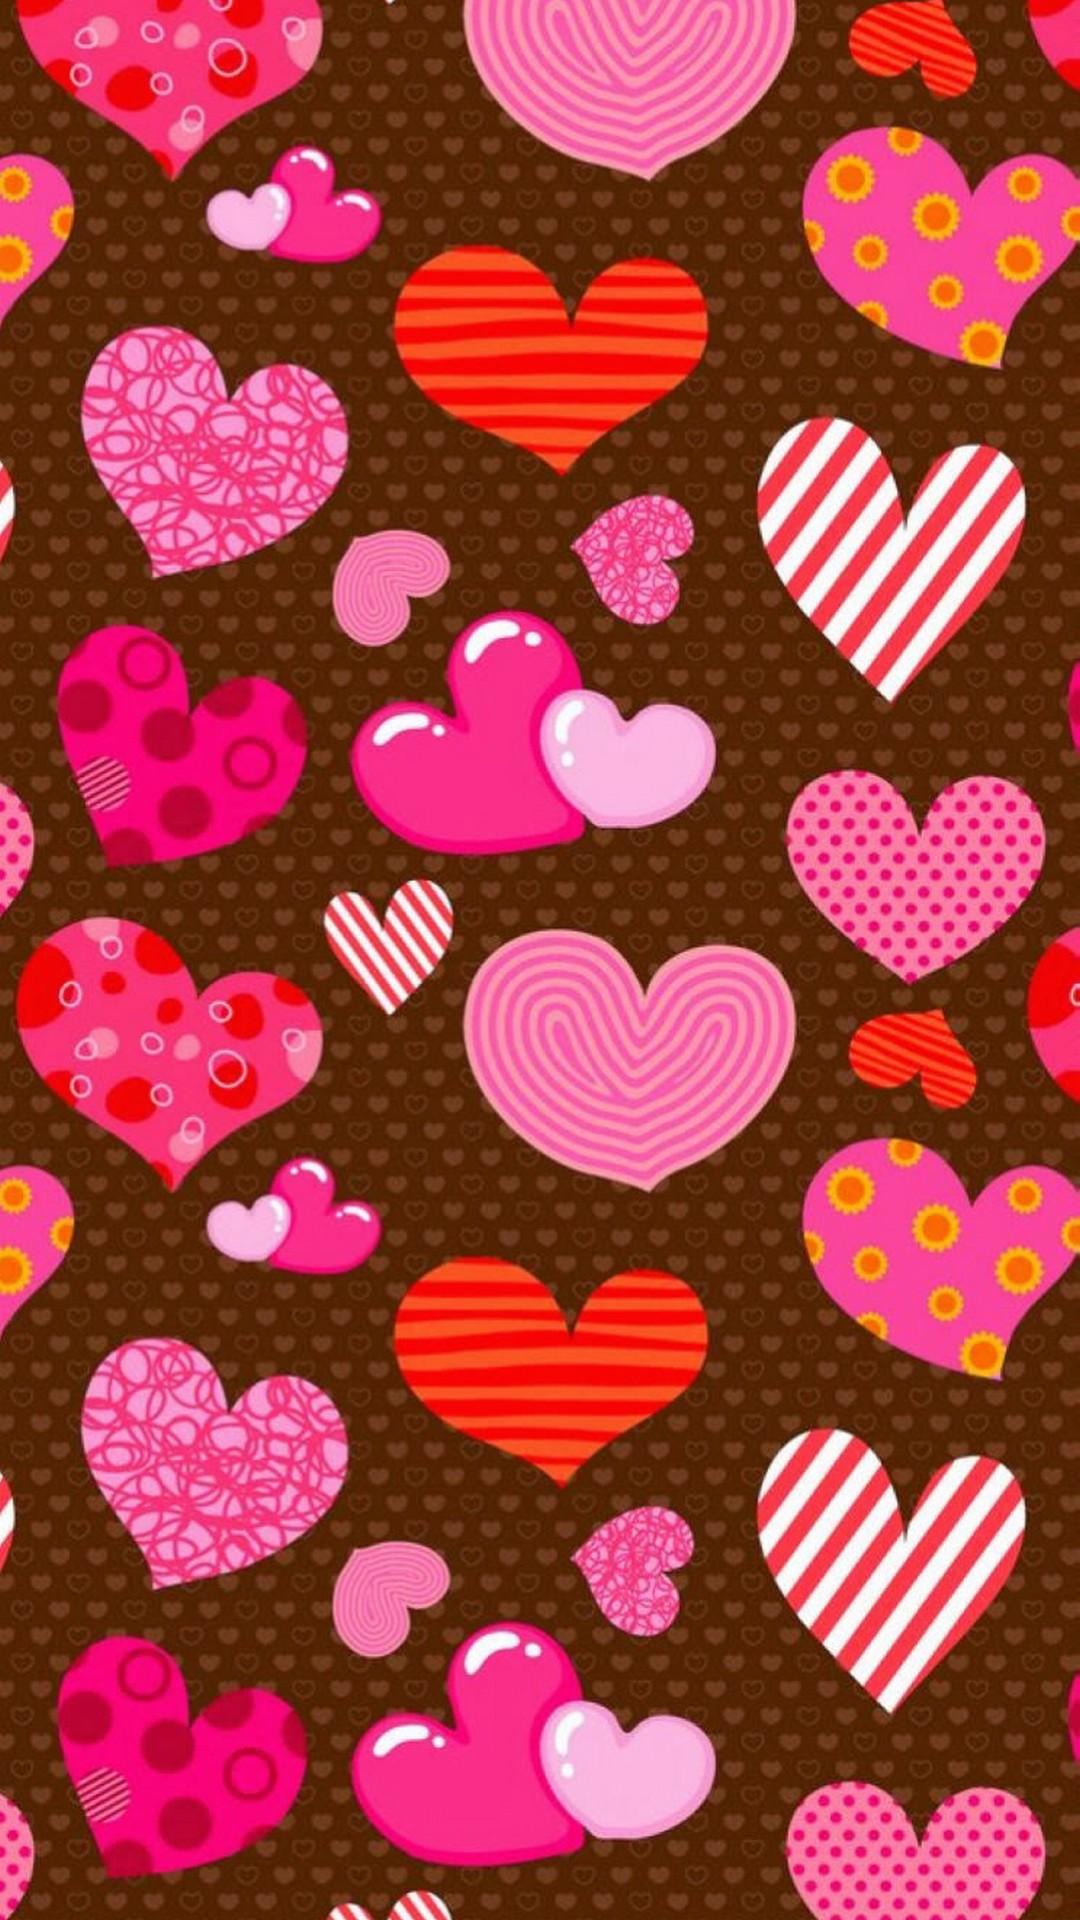 Valentines day iphone wallpapers